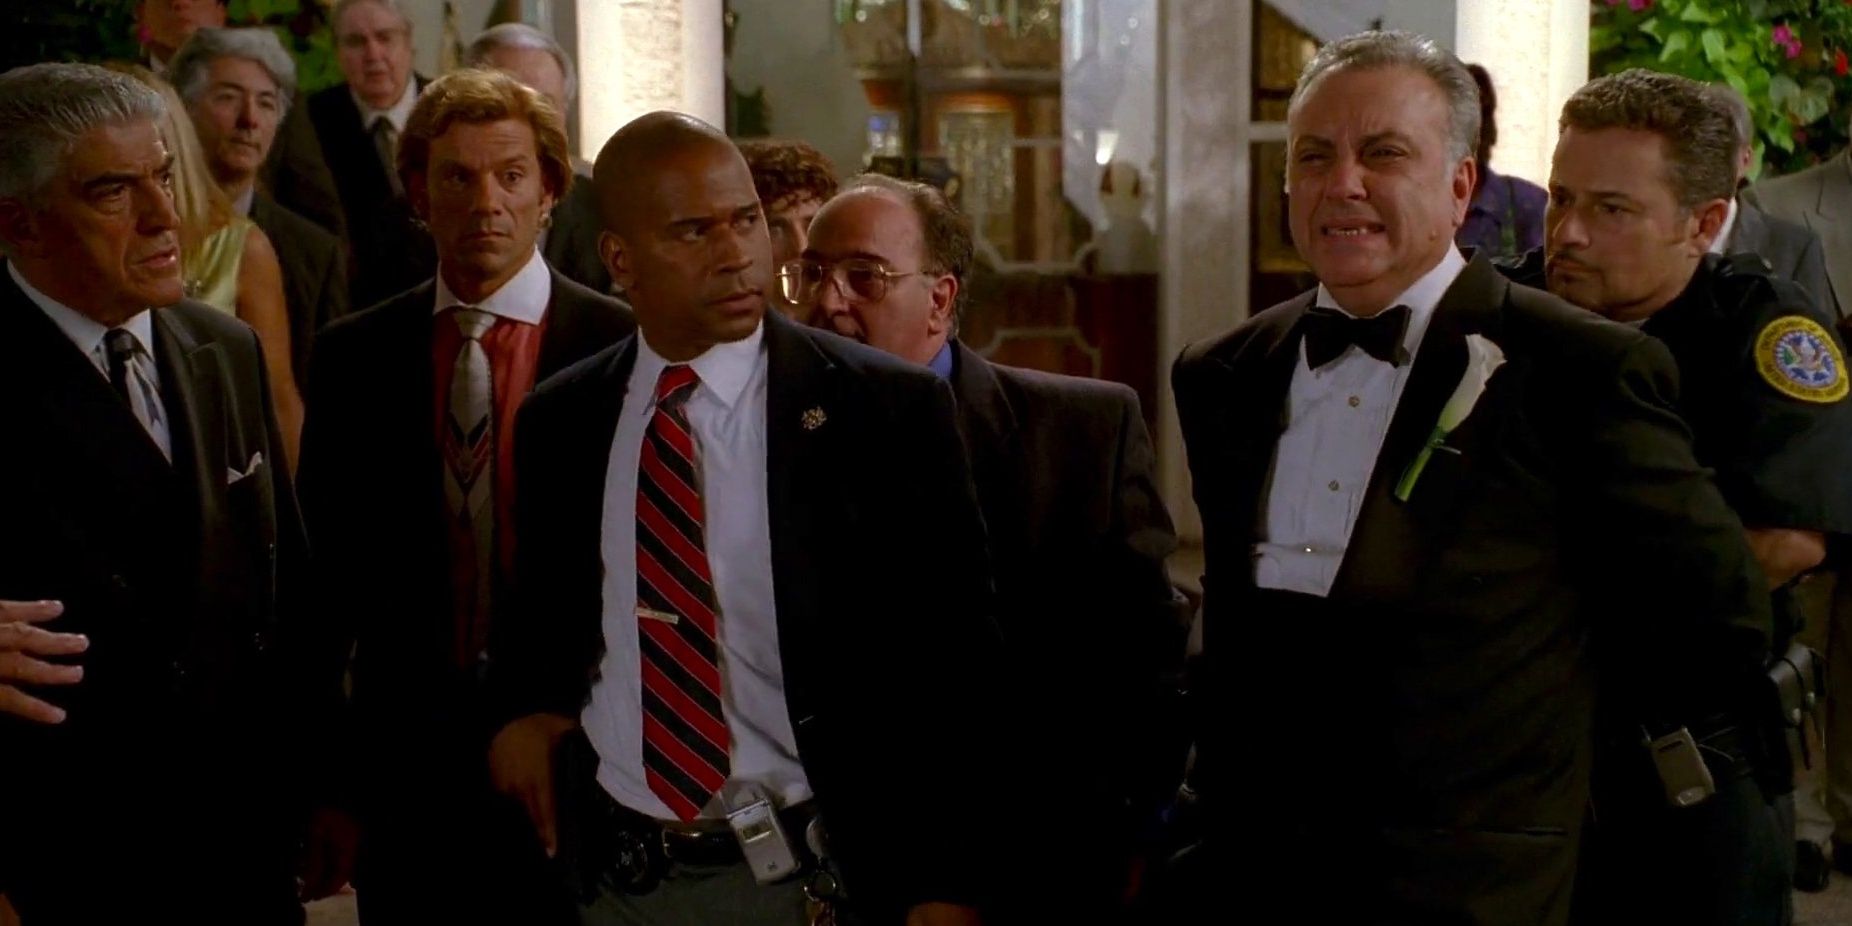 Johnny Sack gets whisked away by the FBI at his daughter's wedding